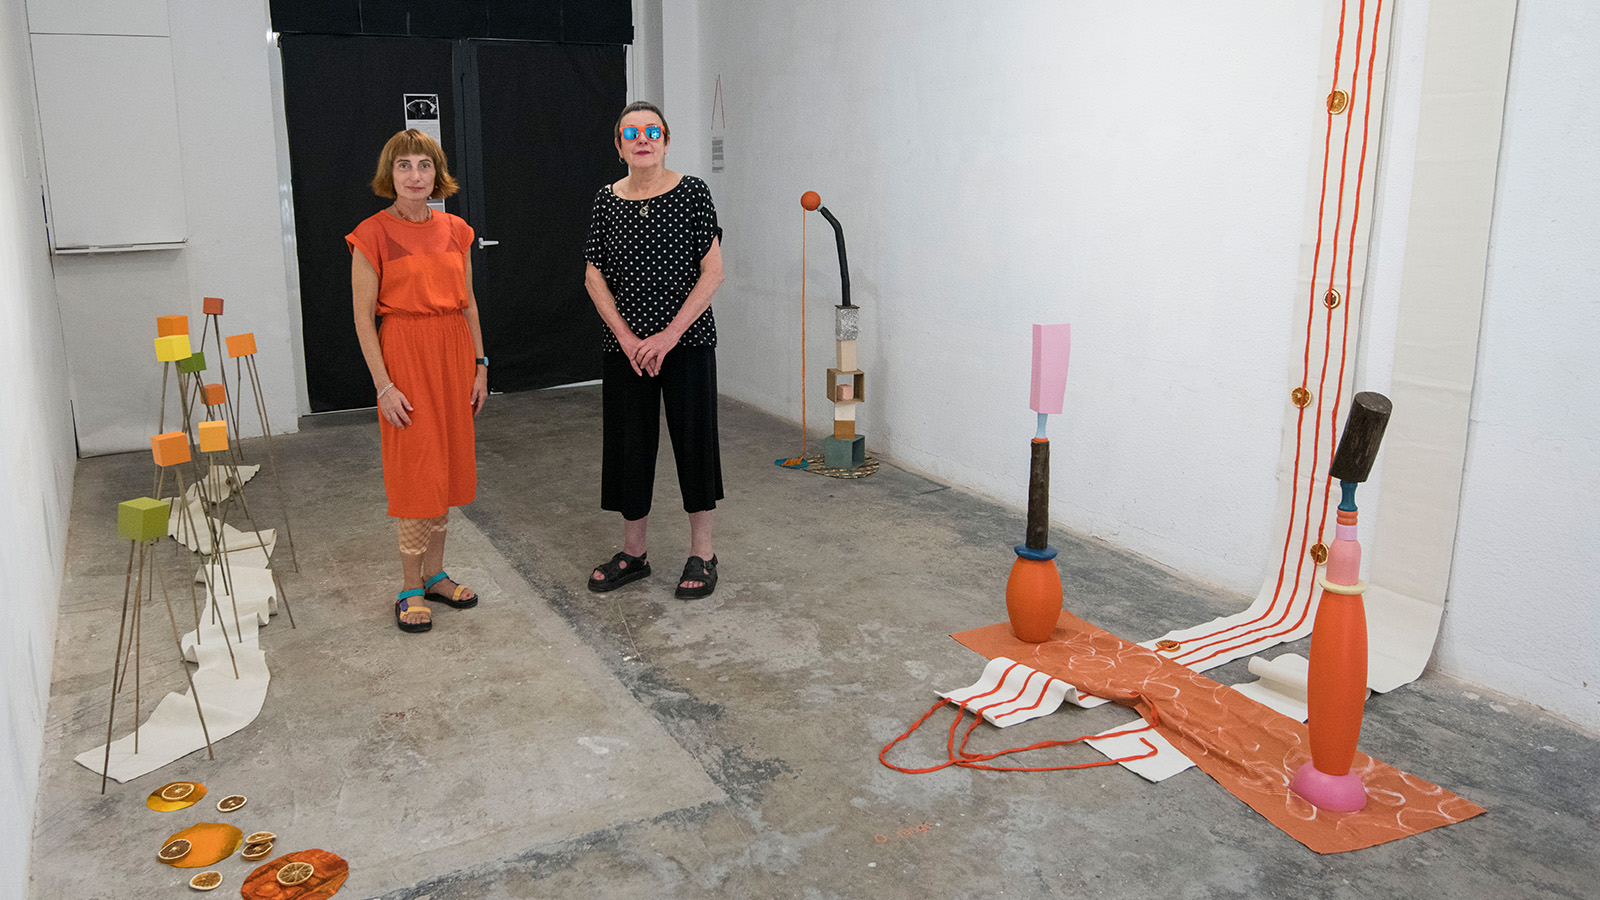 Two women, one in a bright orange jumpsuit and one in black, stand in a large white room with various orange and yellow sculptures